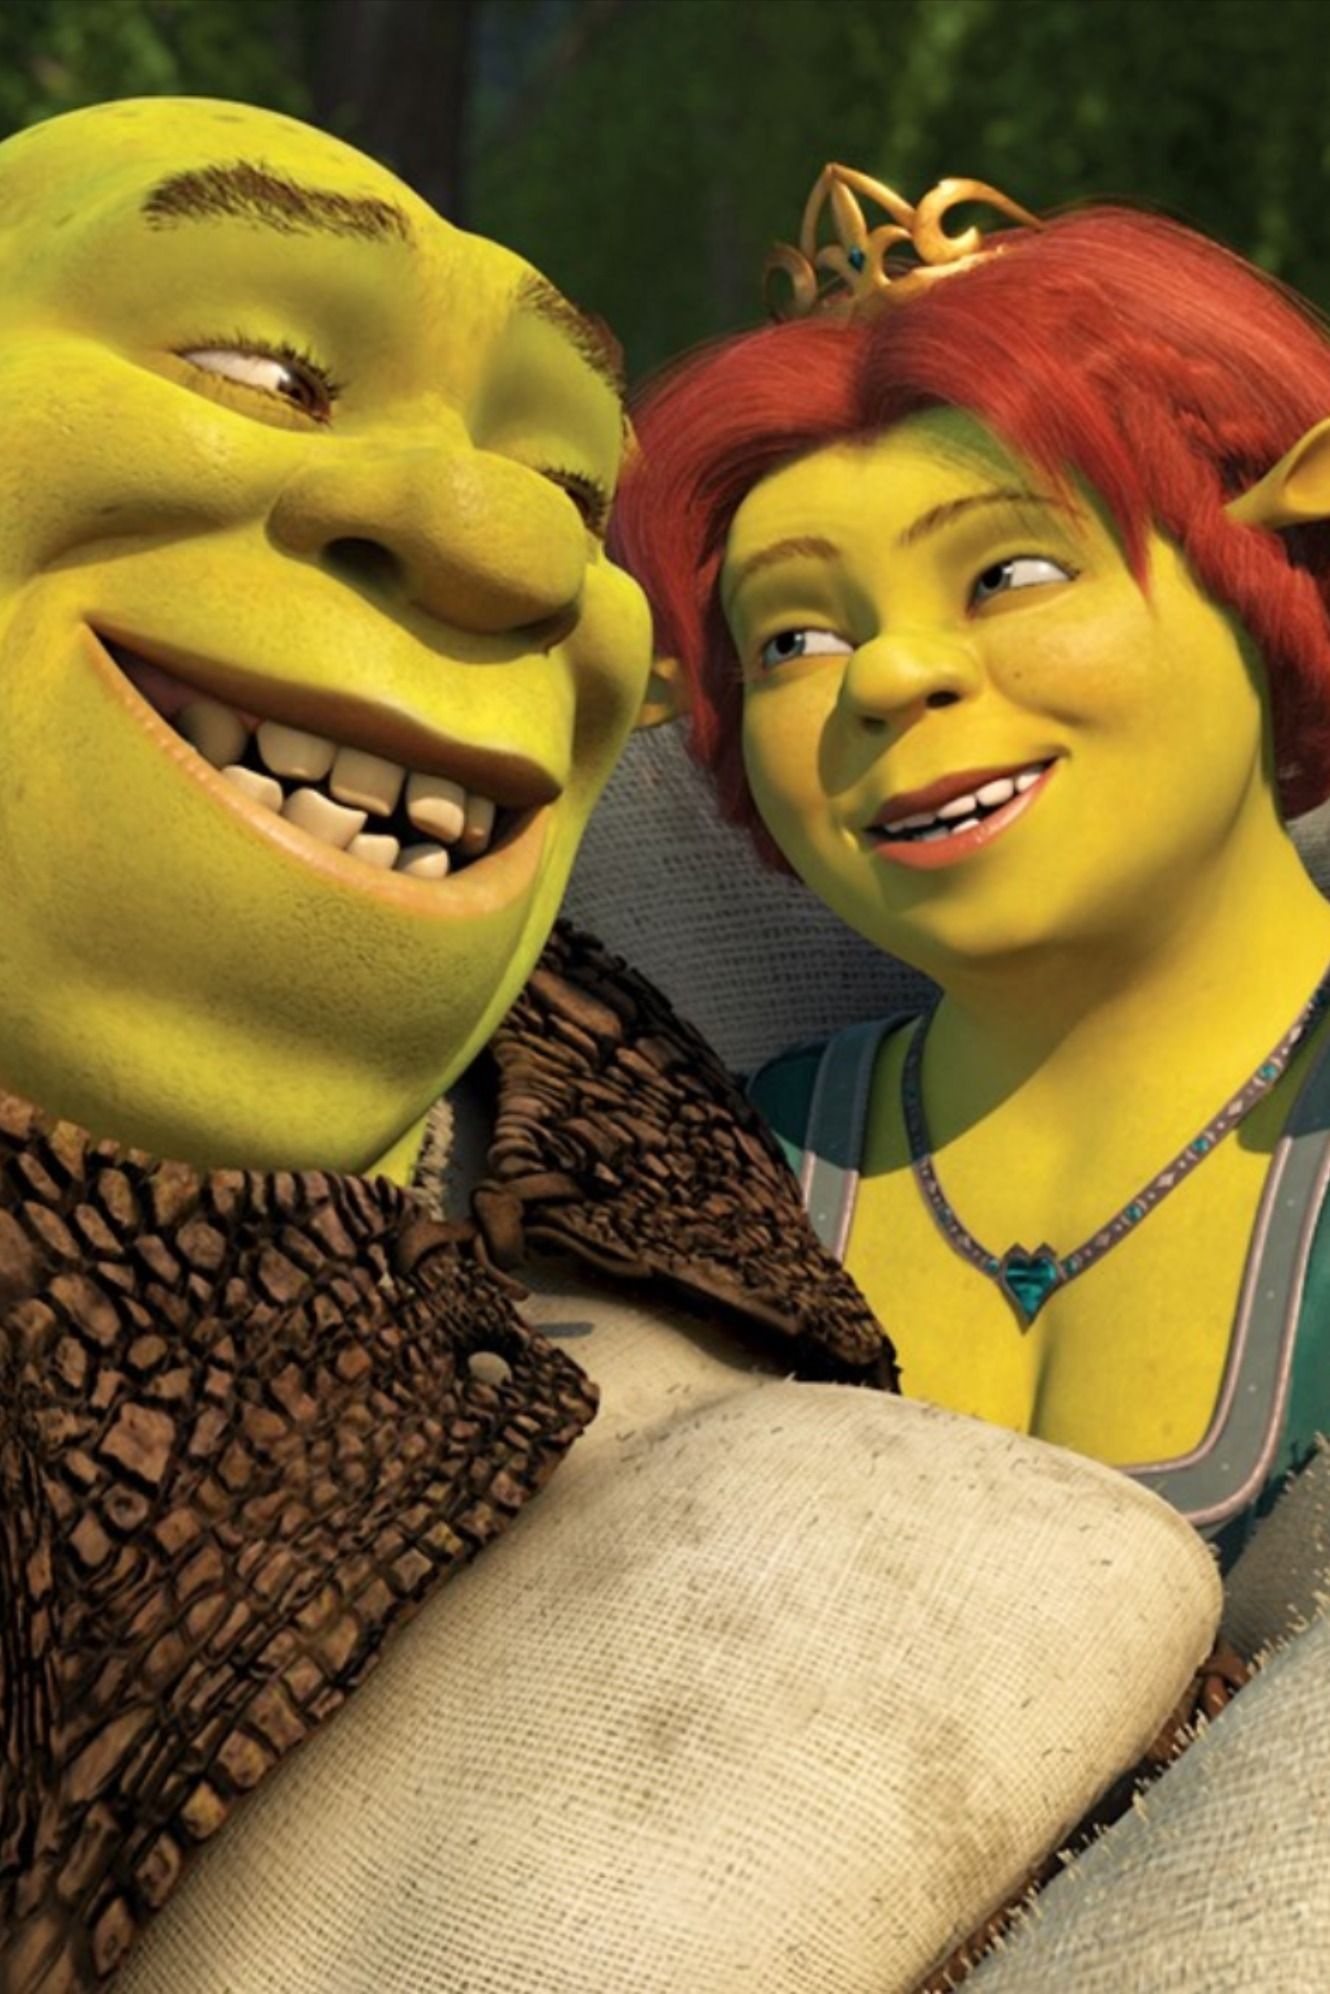 charles turley recommends Pictures Of Fiona From Shrek